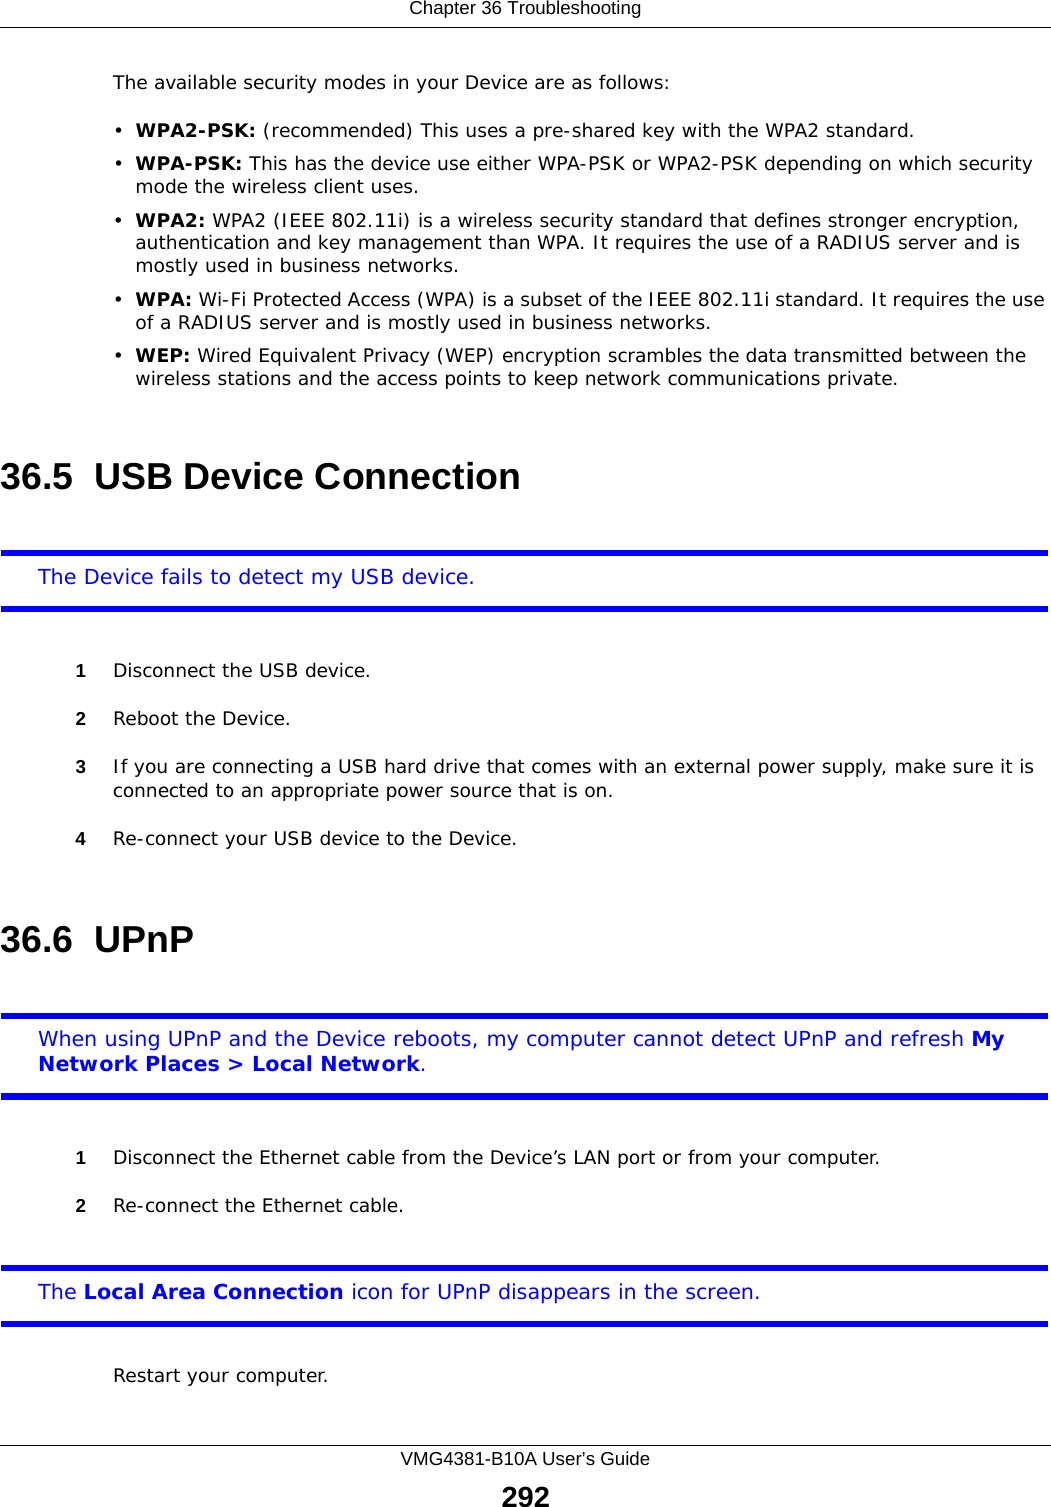 Chapter 36 TroubleshootingVMG4381-B10A User’s Guide292The available security modes in your Device are as follows:•WPA2-PSK: (recommended) This uses a pre-shared key with the WPA2 standard.•WPA-PSK: This has the device use either WPA-PSK or WPA2-PSK depending on which security mode the wireless client uses. •WPA2: WPA2 (IEEE 802.11i) is a wireless security standard that defines stronger encryption, authentication and key management than WPA. It requires the use of a RADIUS server and is mostly used in business networks.•WPA: Wi-Fi Protected Access (WPA) is a subset of the IEEE 802.11i standard. It requires the use of a RADIUS server and is mostly used in business networks. •WEP: Wired Equivalent Privacy (WEP) encryption scrambles the data transmitted between the wireless stations and the access points to keep network communications private.36.5  USB Device Connection The Device fails to detect my USB device.1Disconnect the USB device.2Reboot the Device.3If you are connecting a USB hard drive that comes with an external power supply, make sure it is connected to an appropriate power source that is on. 4Re-connect your USB device to the Device.36.6  UPnPWhen using UPnP and the Device reboots, my computer cannot detect UPnP and refresh My Network Places &gt; Local Network.1Disconnect the Ethernet cable from the Device’s LAN port or from your computer.2Re-connect the Ethernet cable. The Local Area Connection icon for UPnP disappears in the screen.Restart your computer.